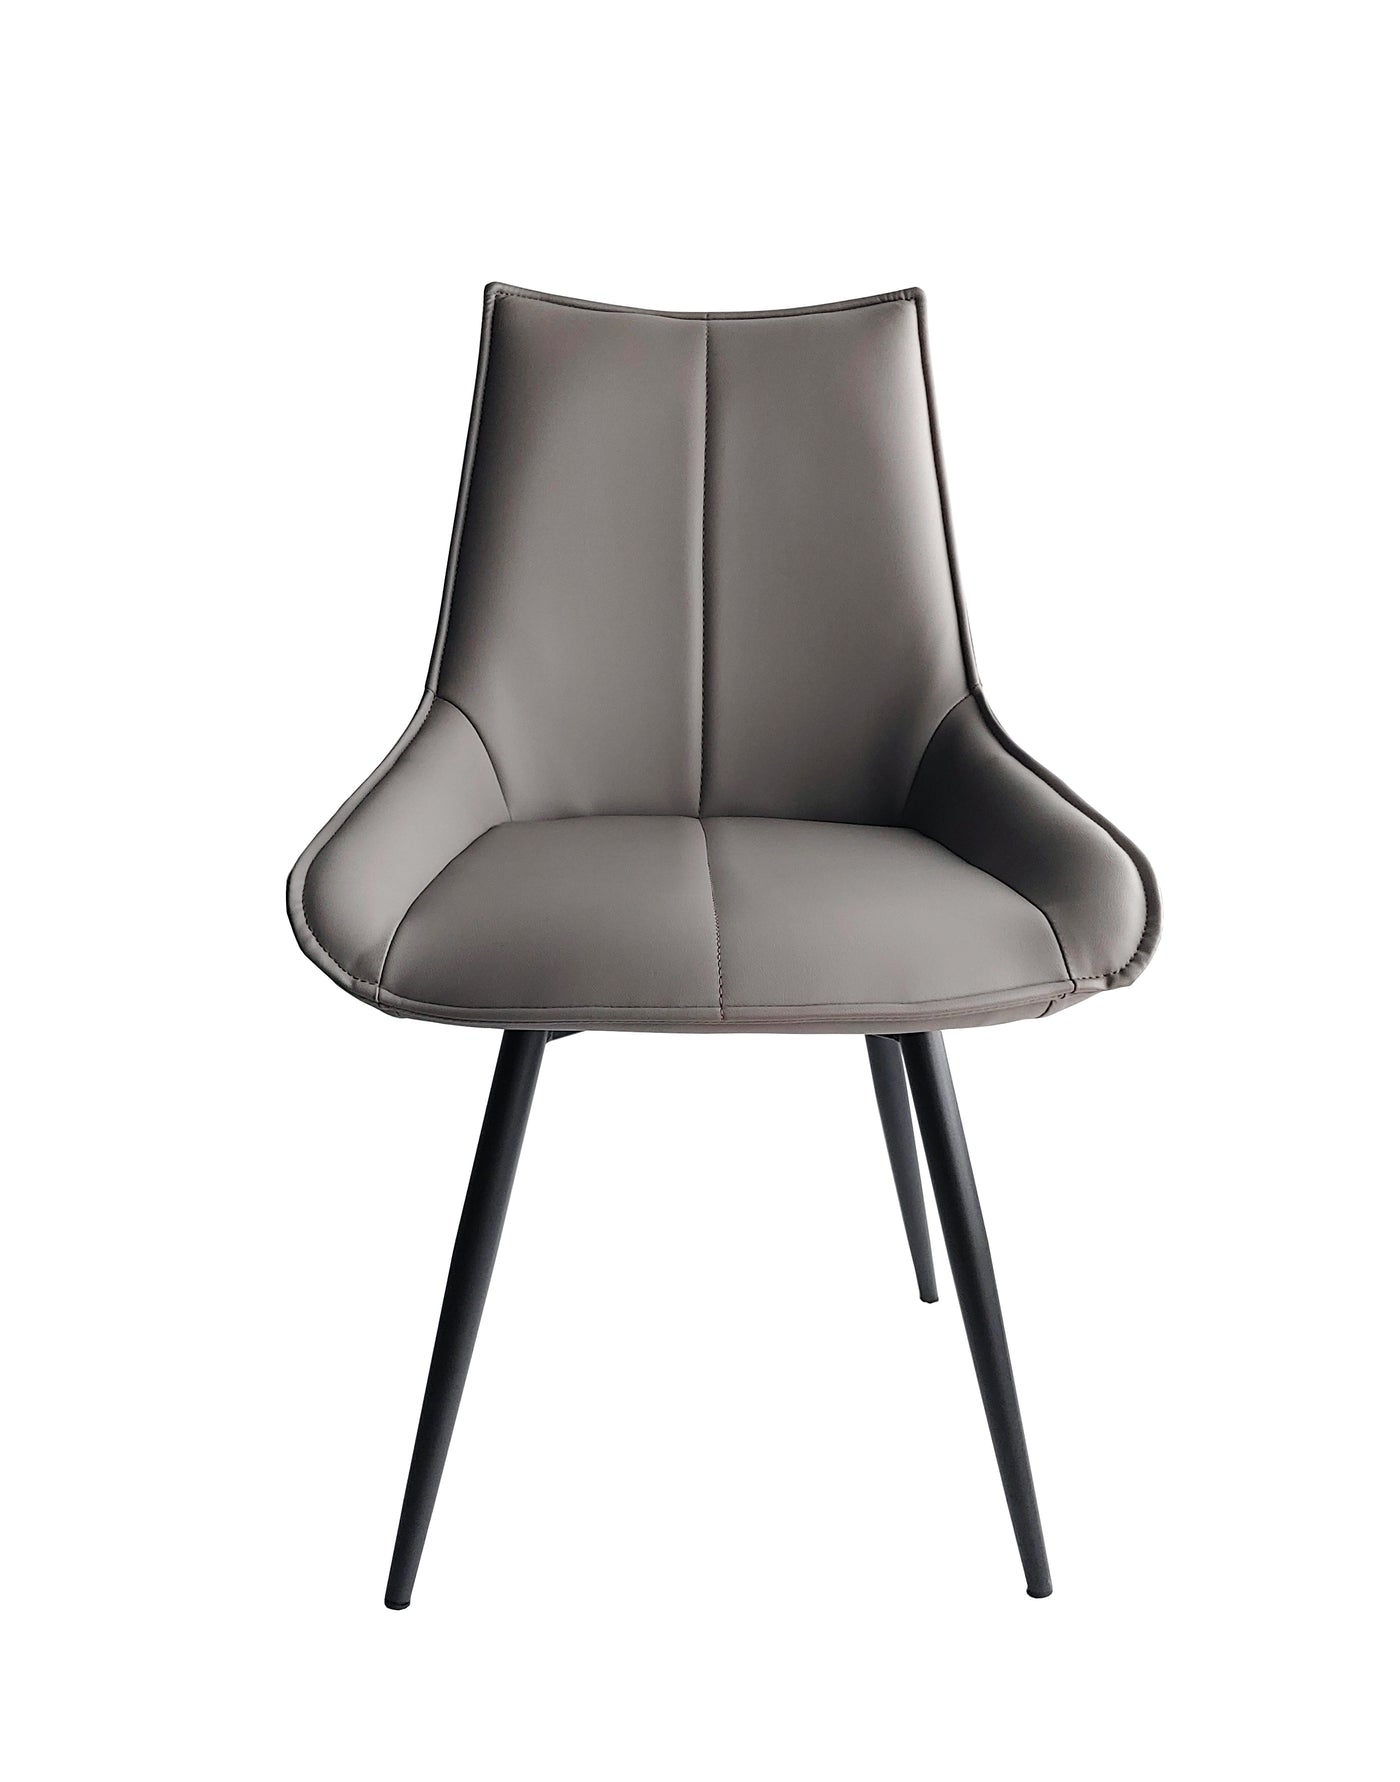 Amber Gray dining chair